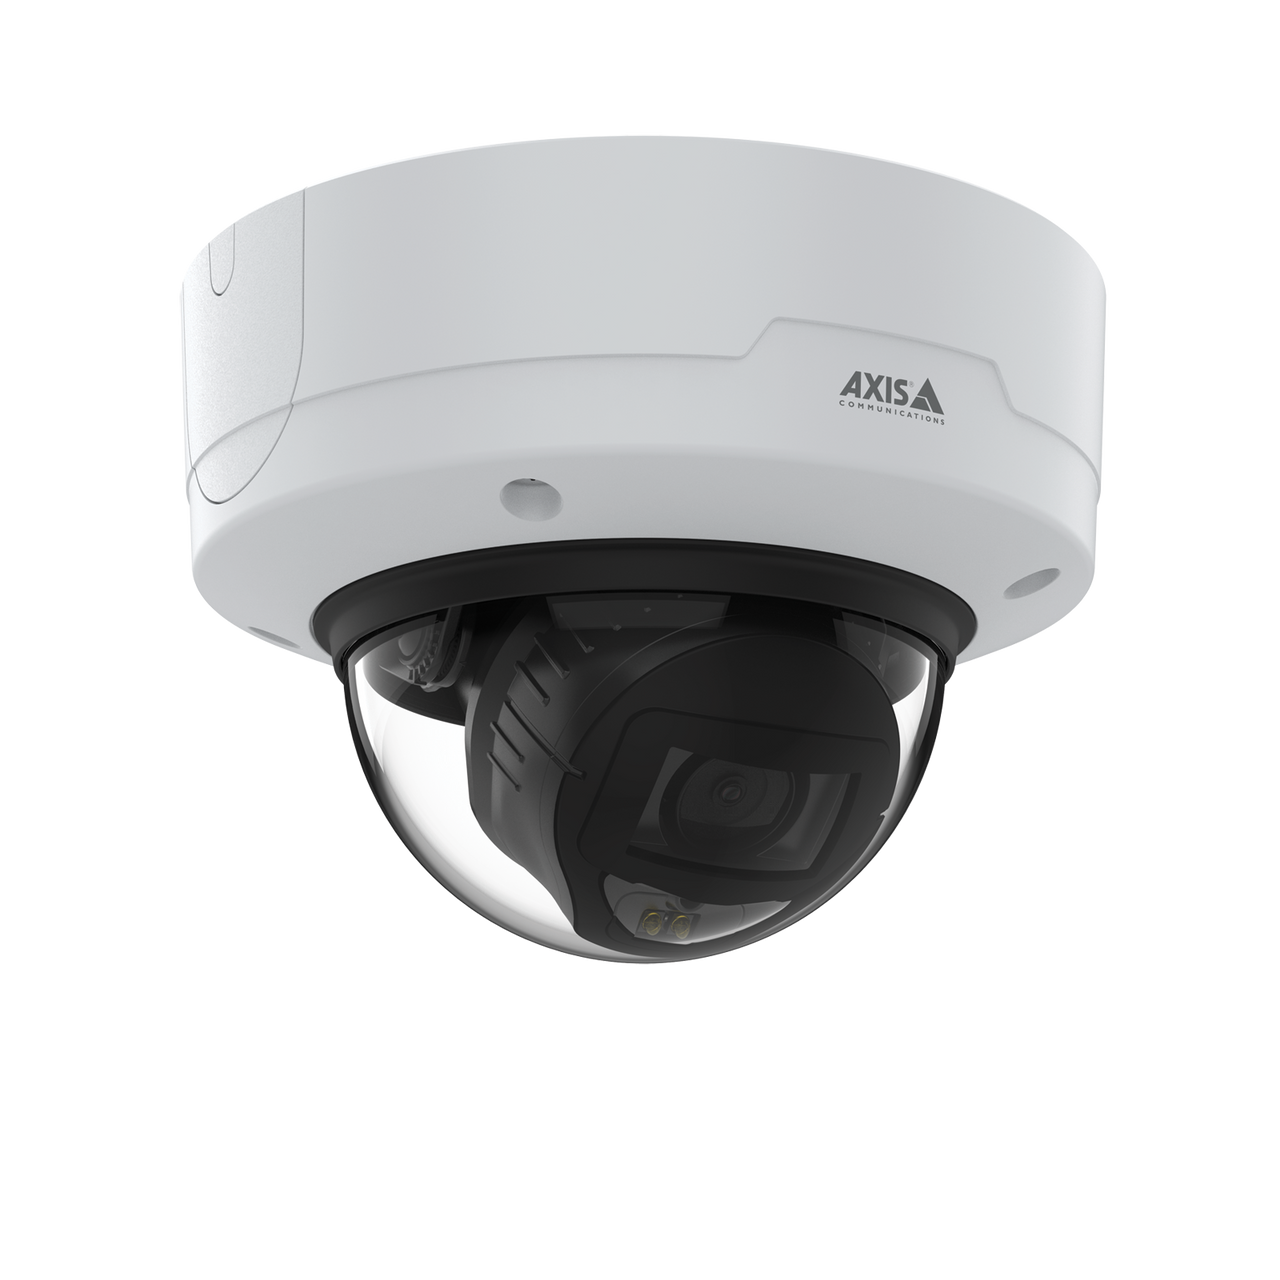 AXIS P3268-LV Indoor 8 MP dome with IR and deep learning